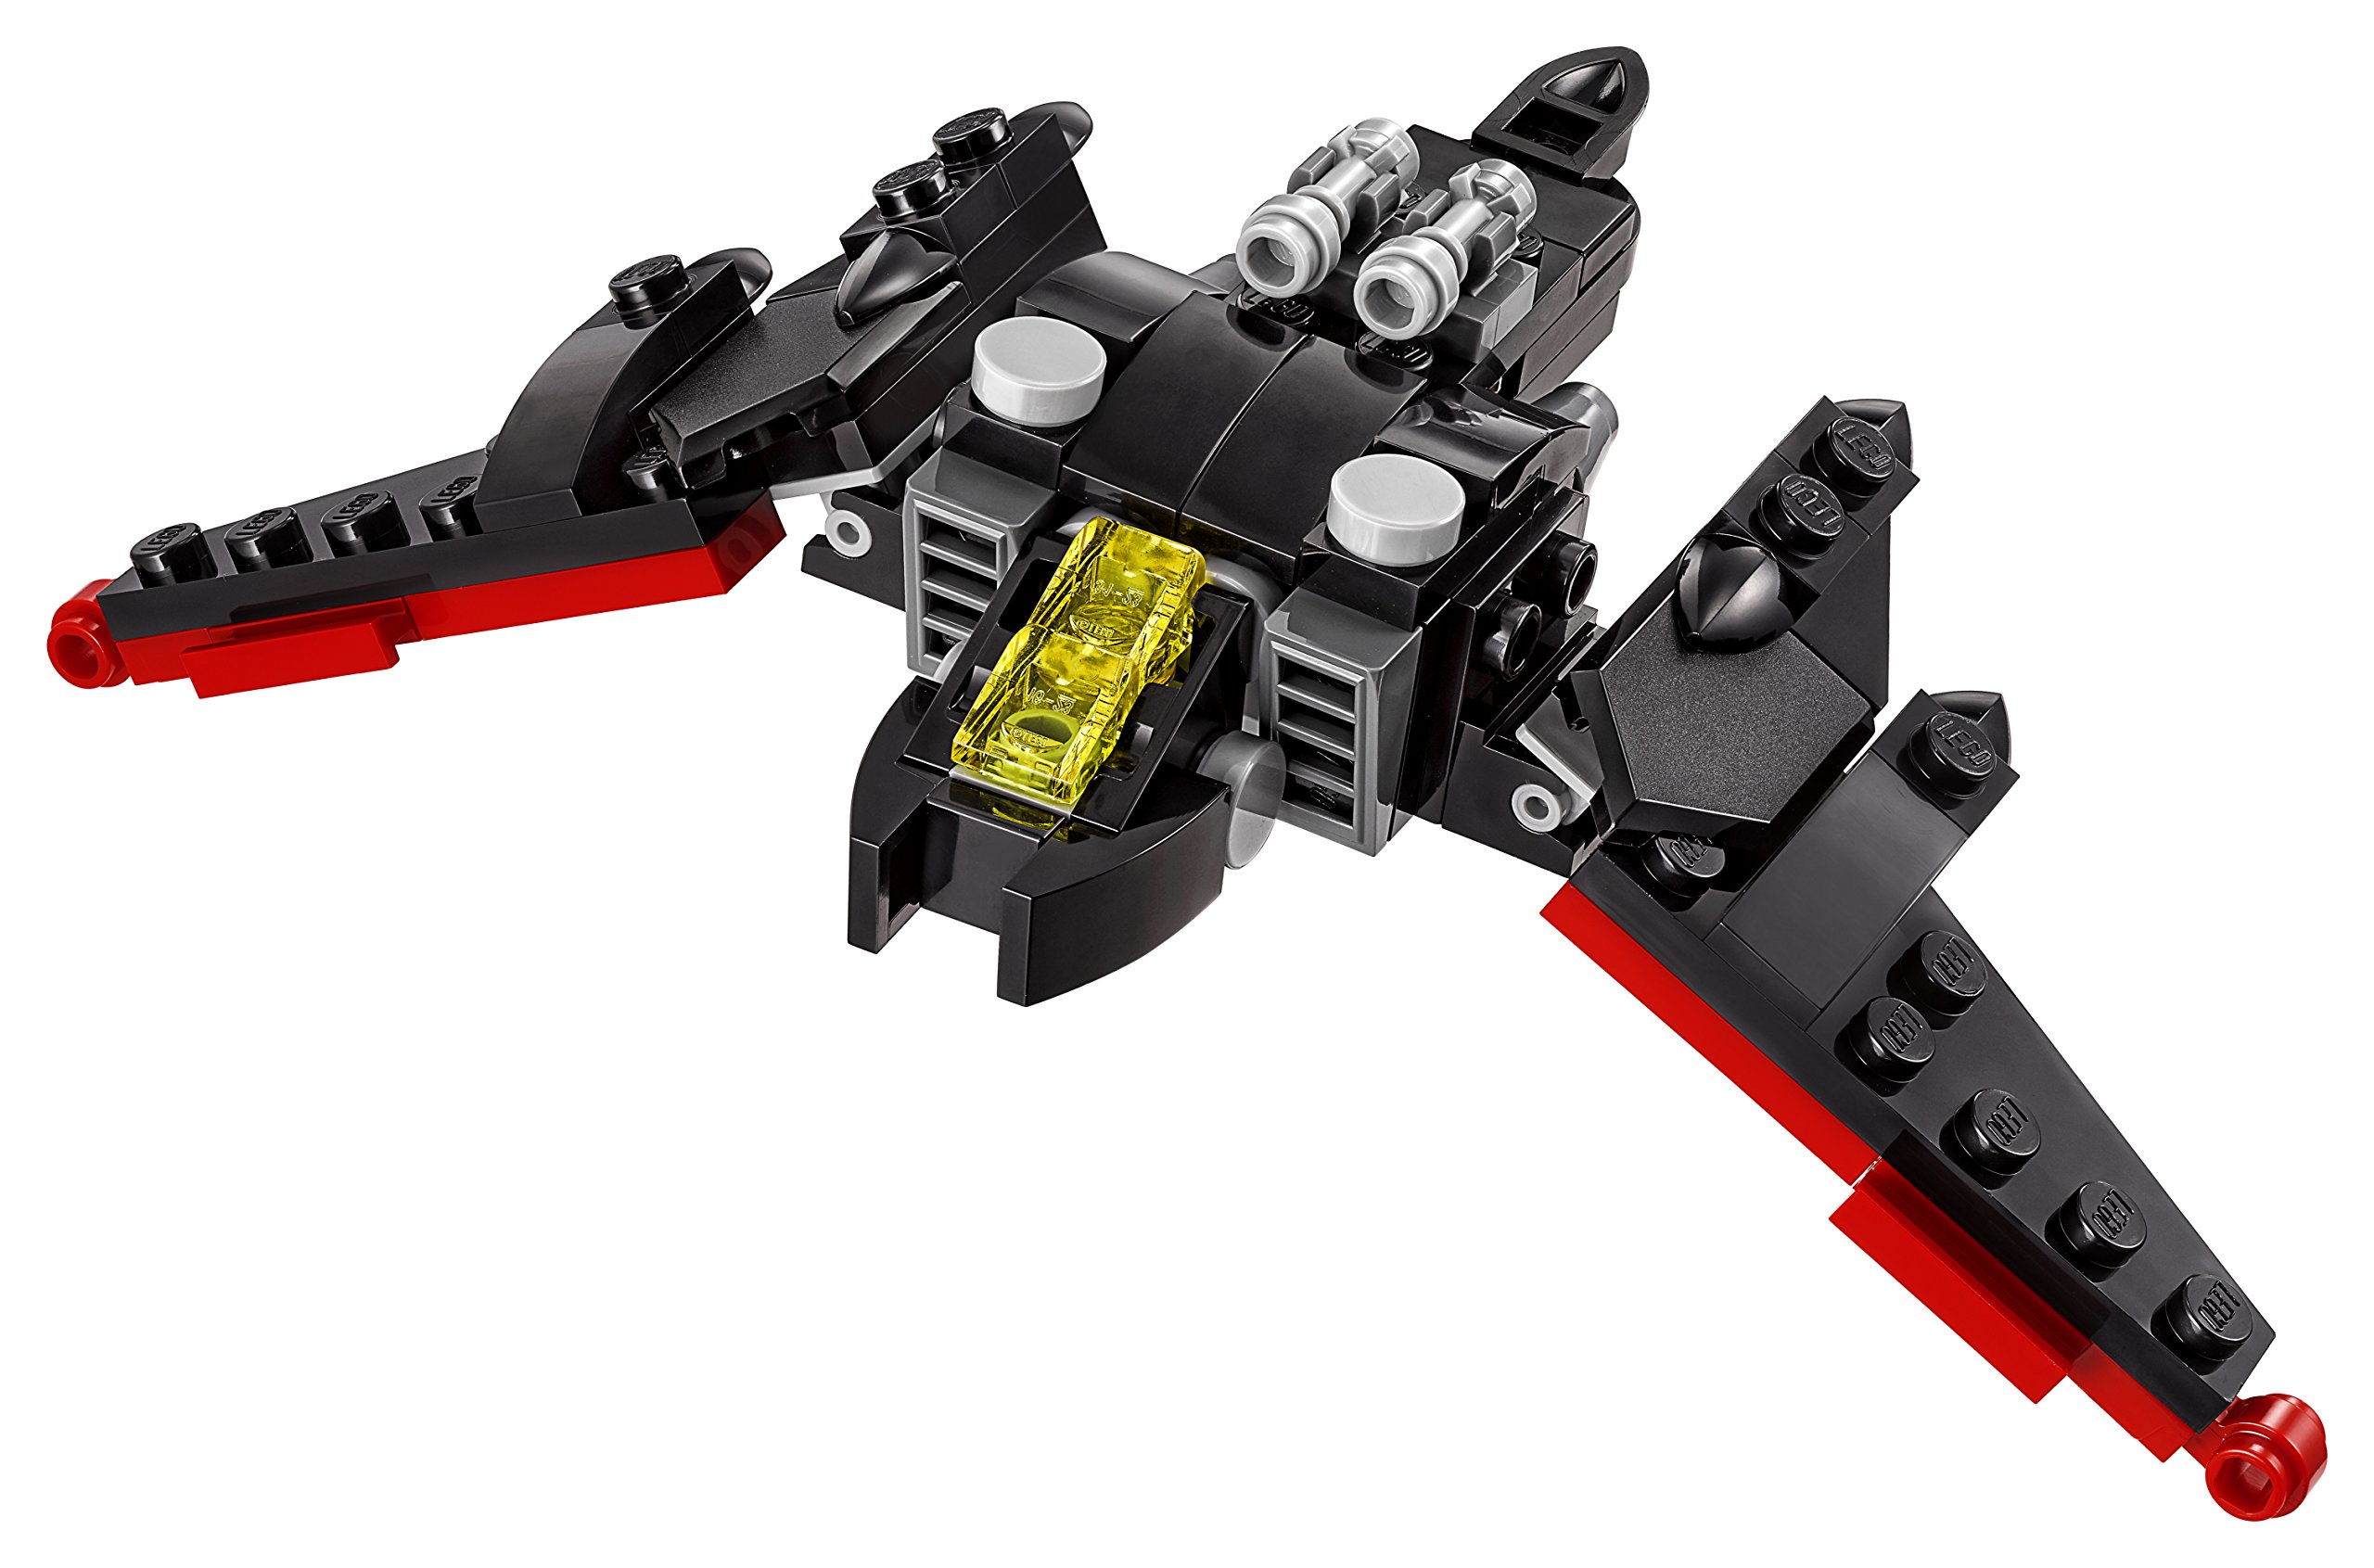 Lego The Movie Exclusive Polybag Batman The Batwing Mini